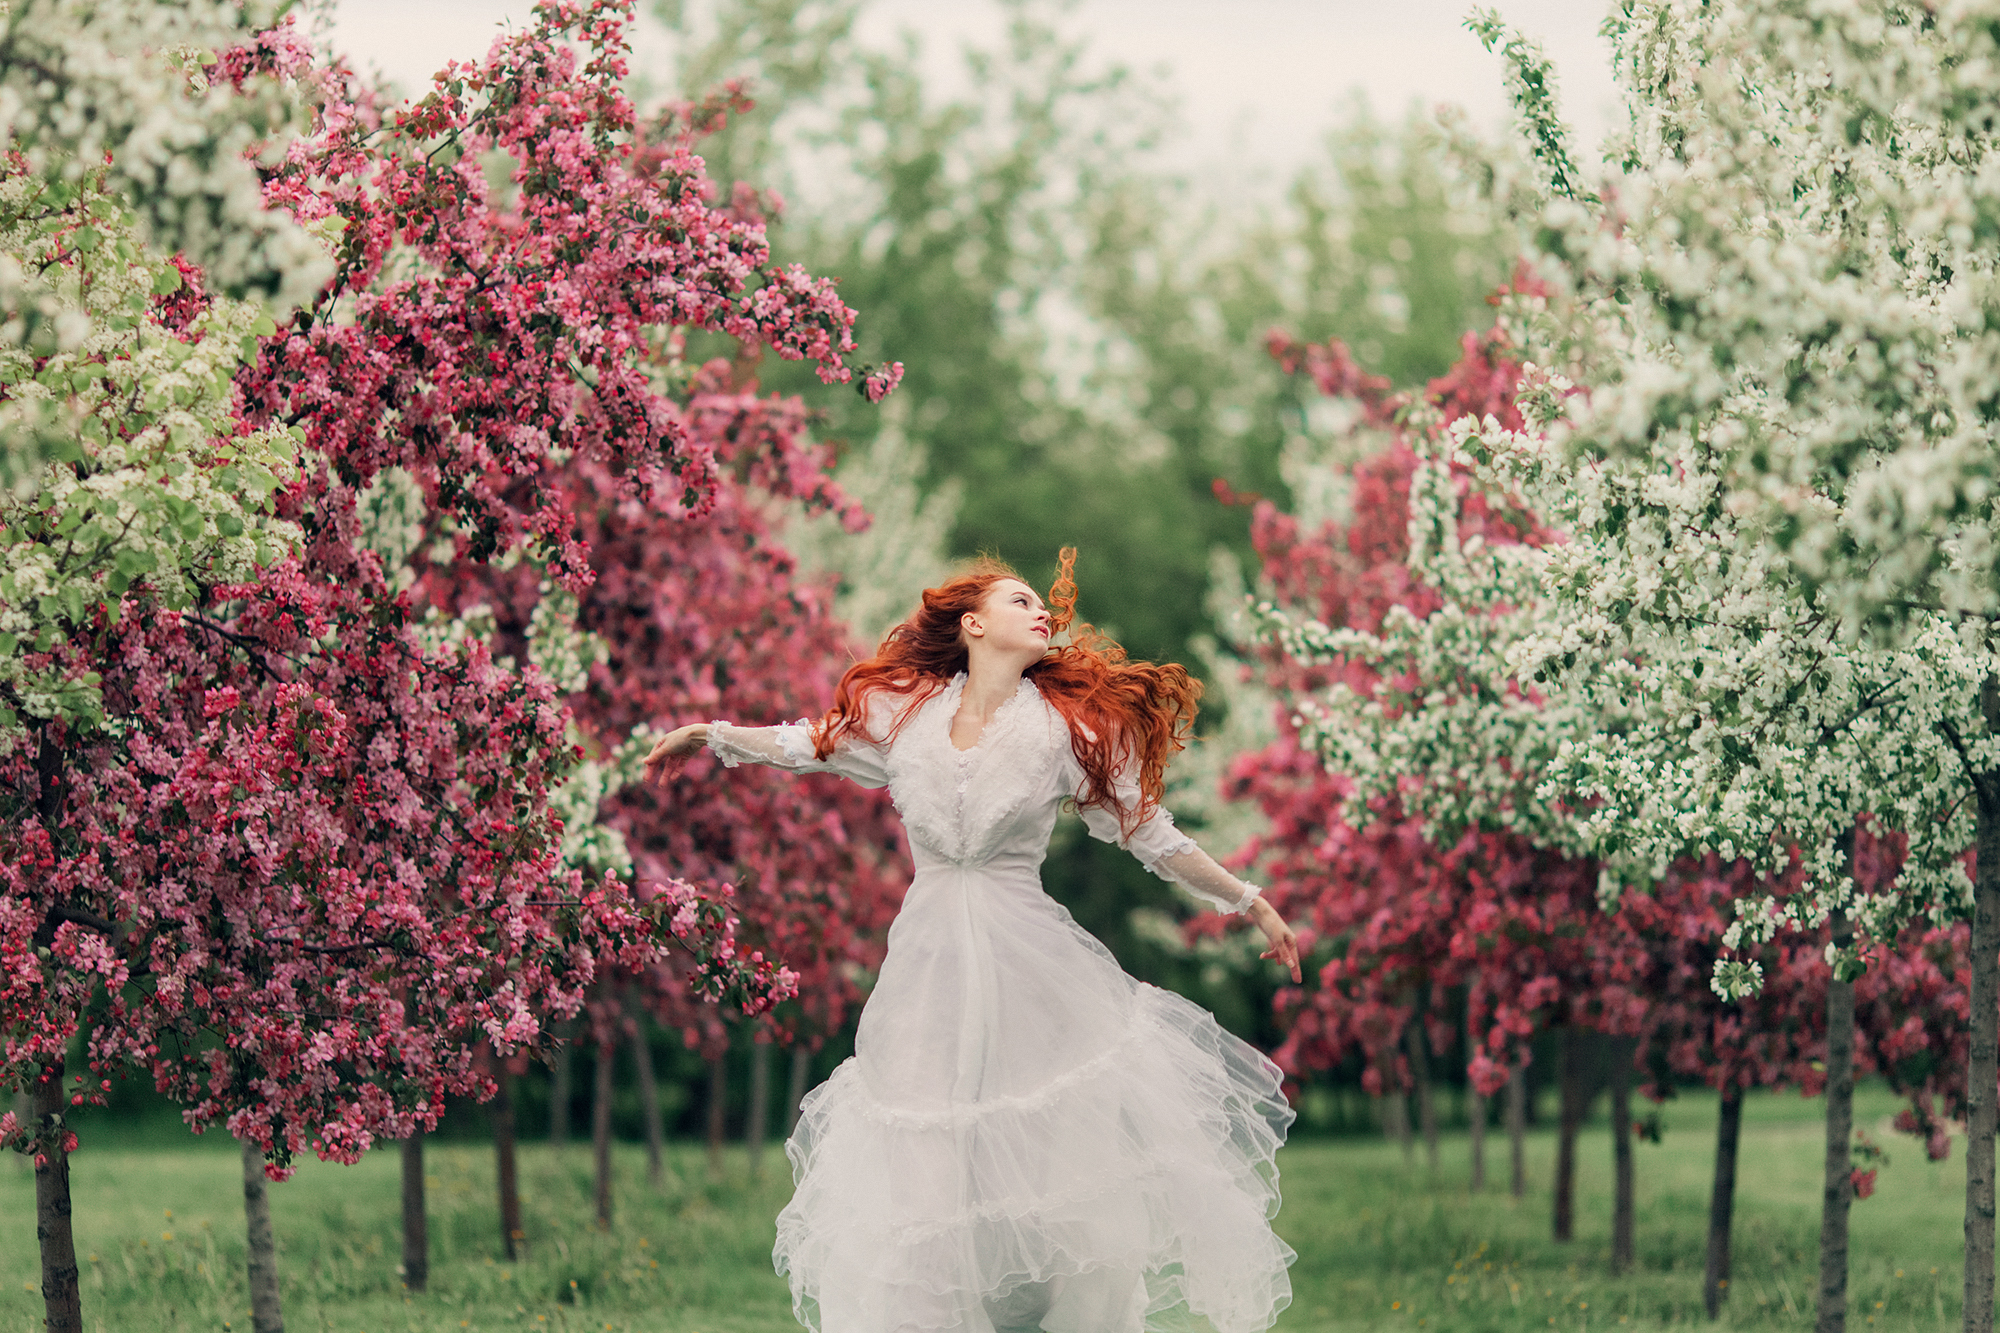 Download Blossom White Dress Outdoor Redhead Model Woman Mood HD Wallpaper